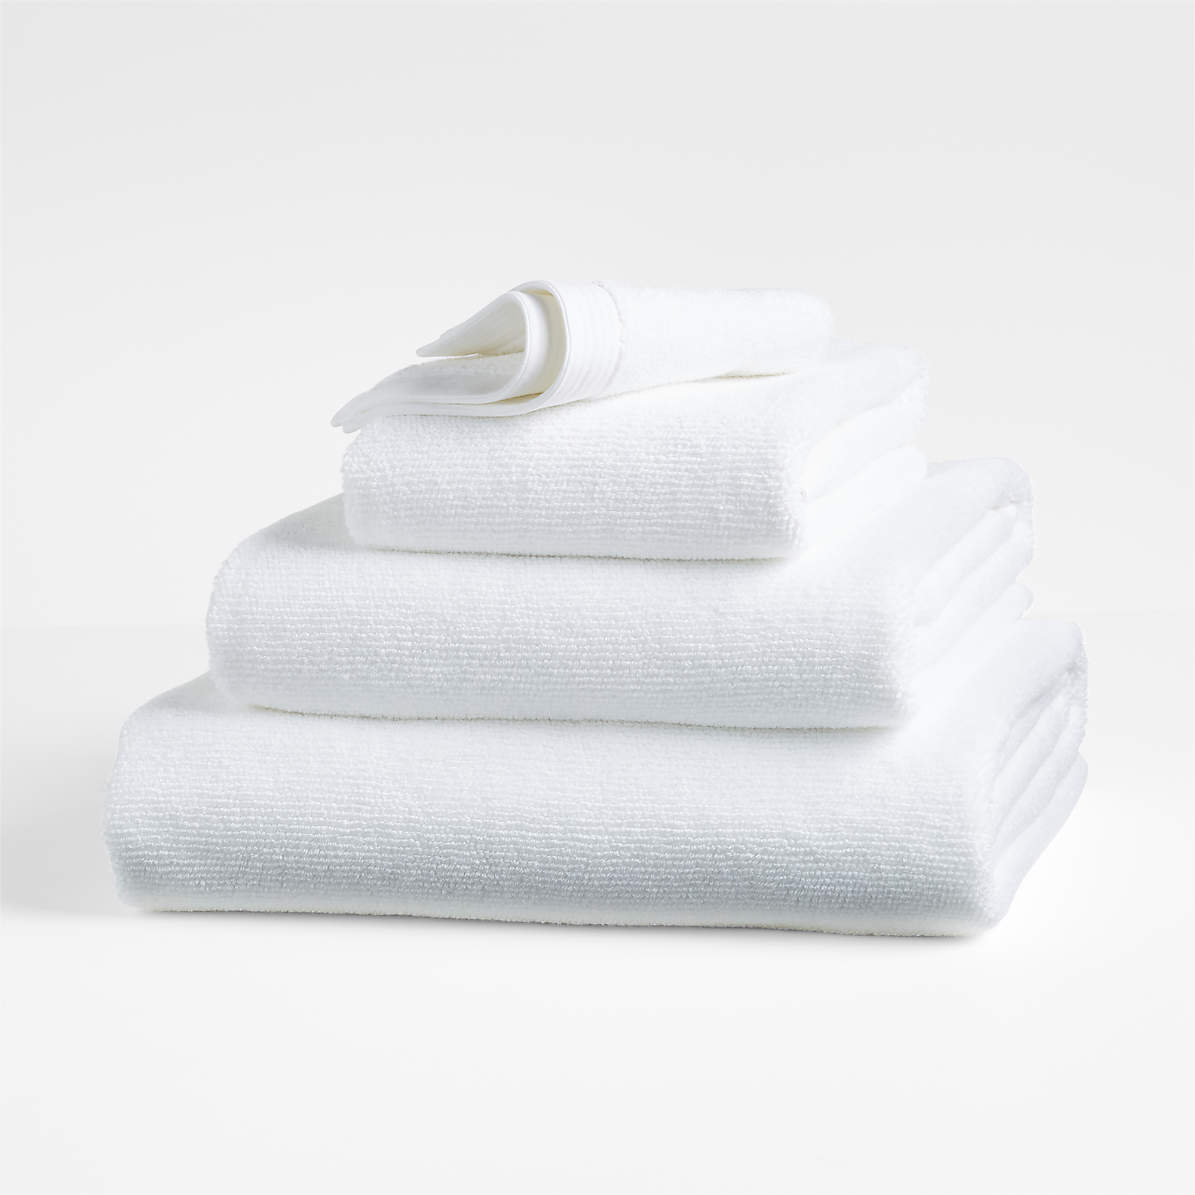 The Citizenry Aegean Cotton Bath Towel White, 56 x 27 x 1/8 H | The Container Store